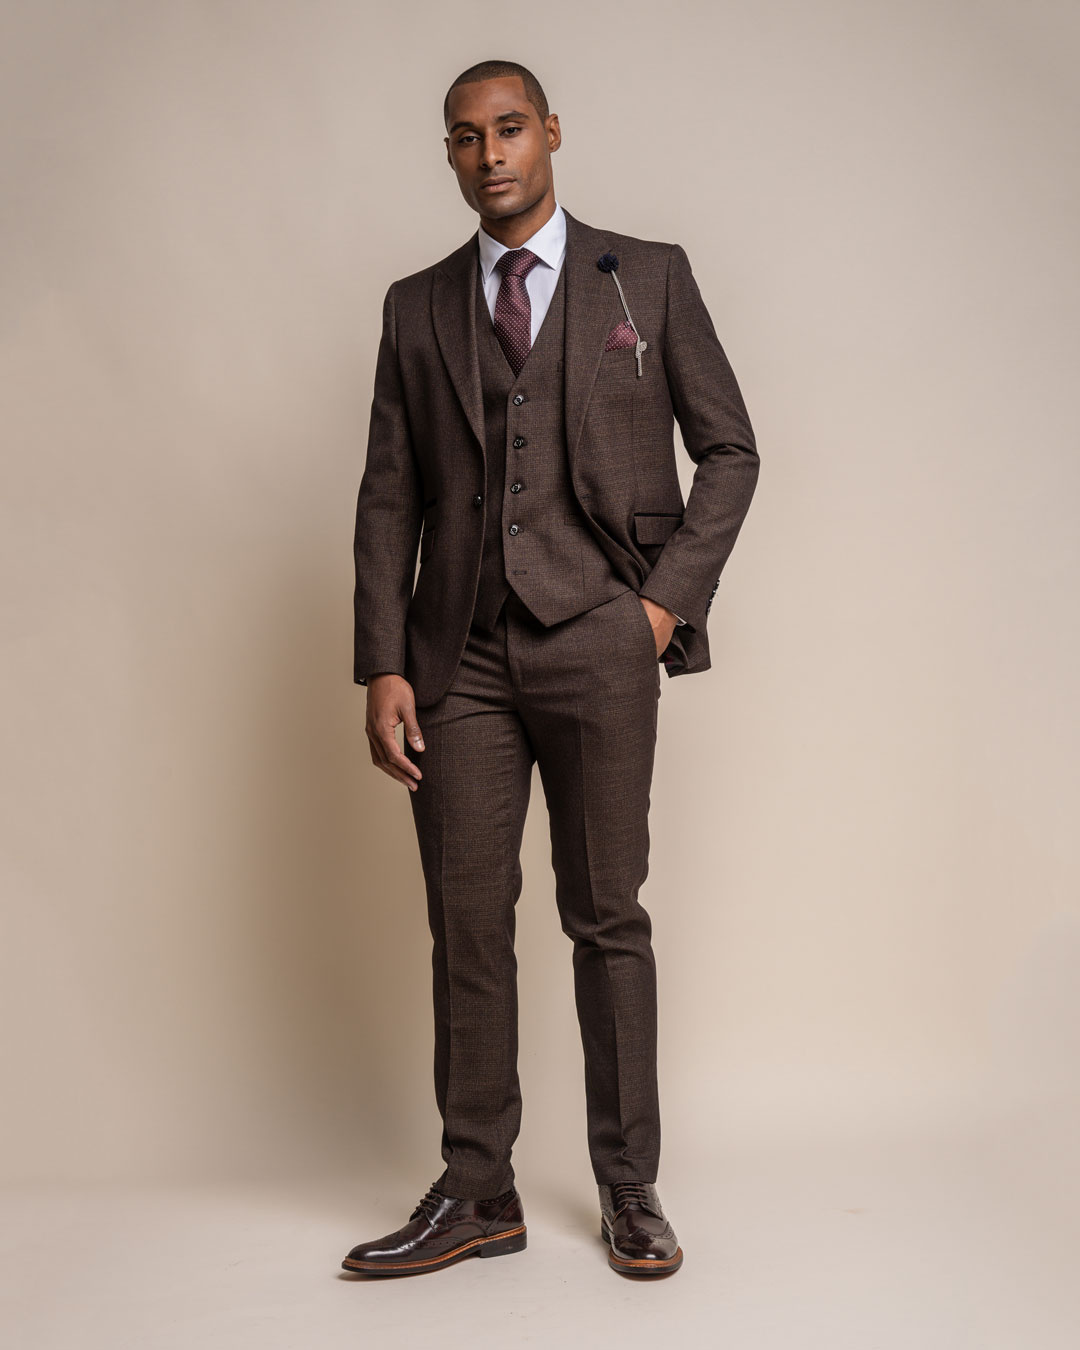 3-piece Peaky Blinders Caridi  Suit brown  - Ready-to-wear suit